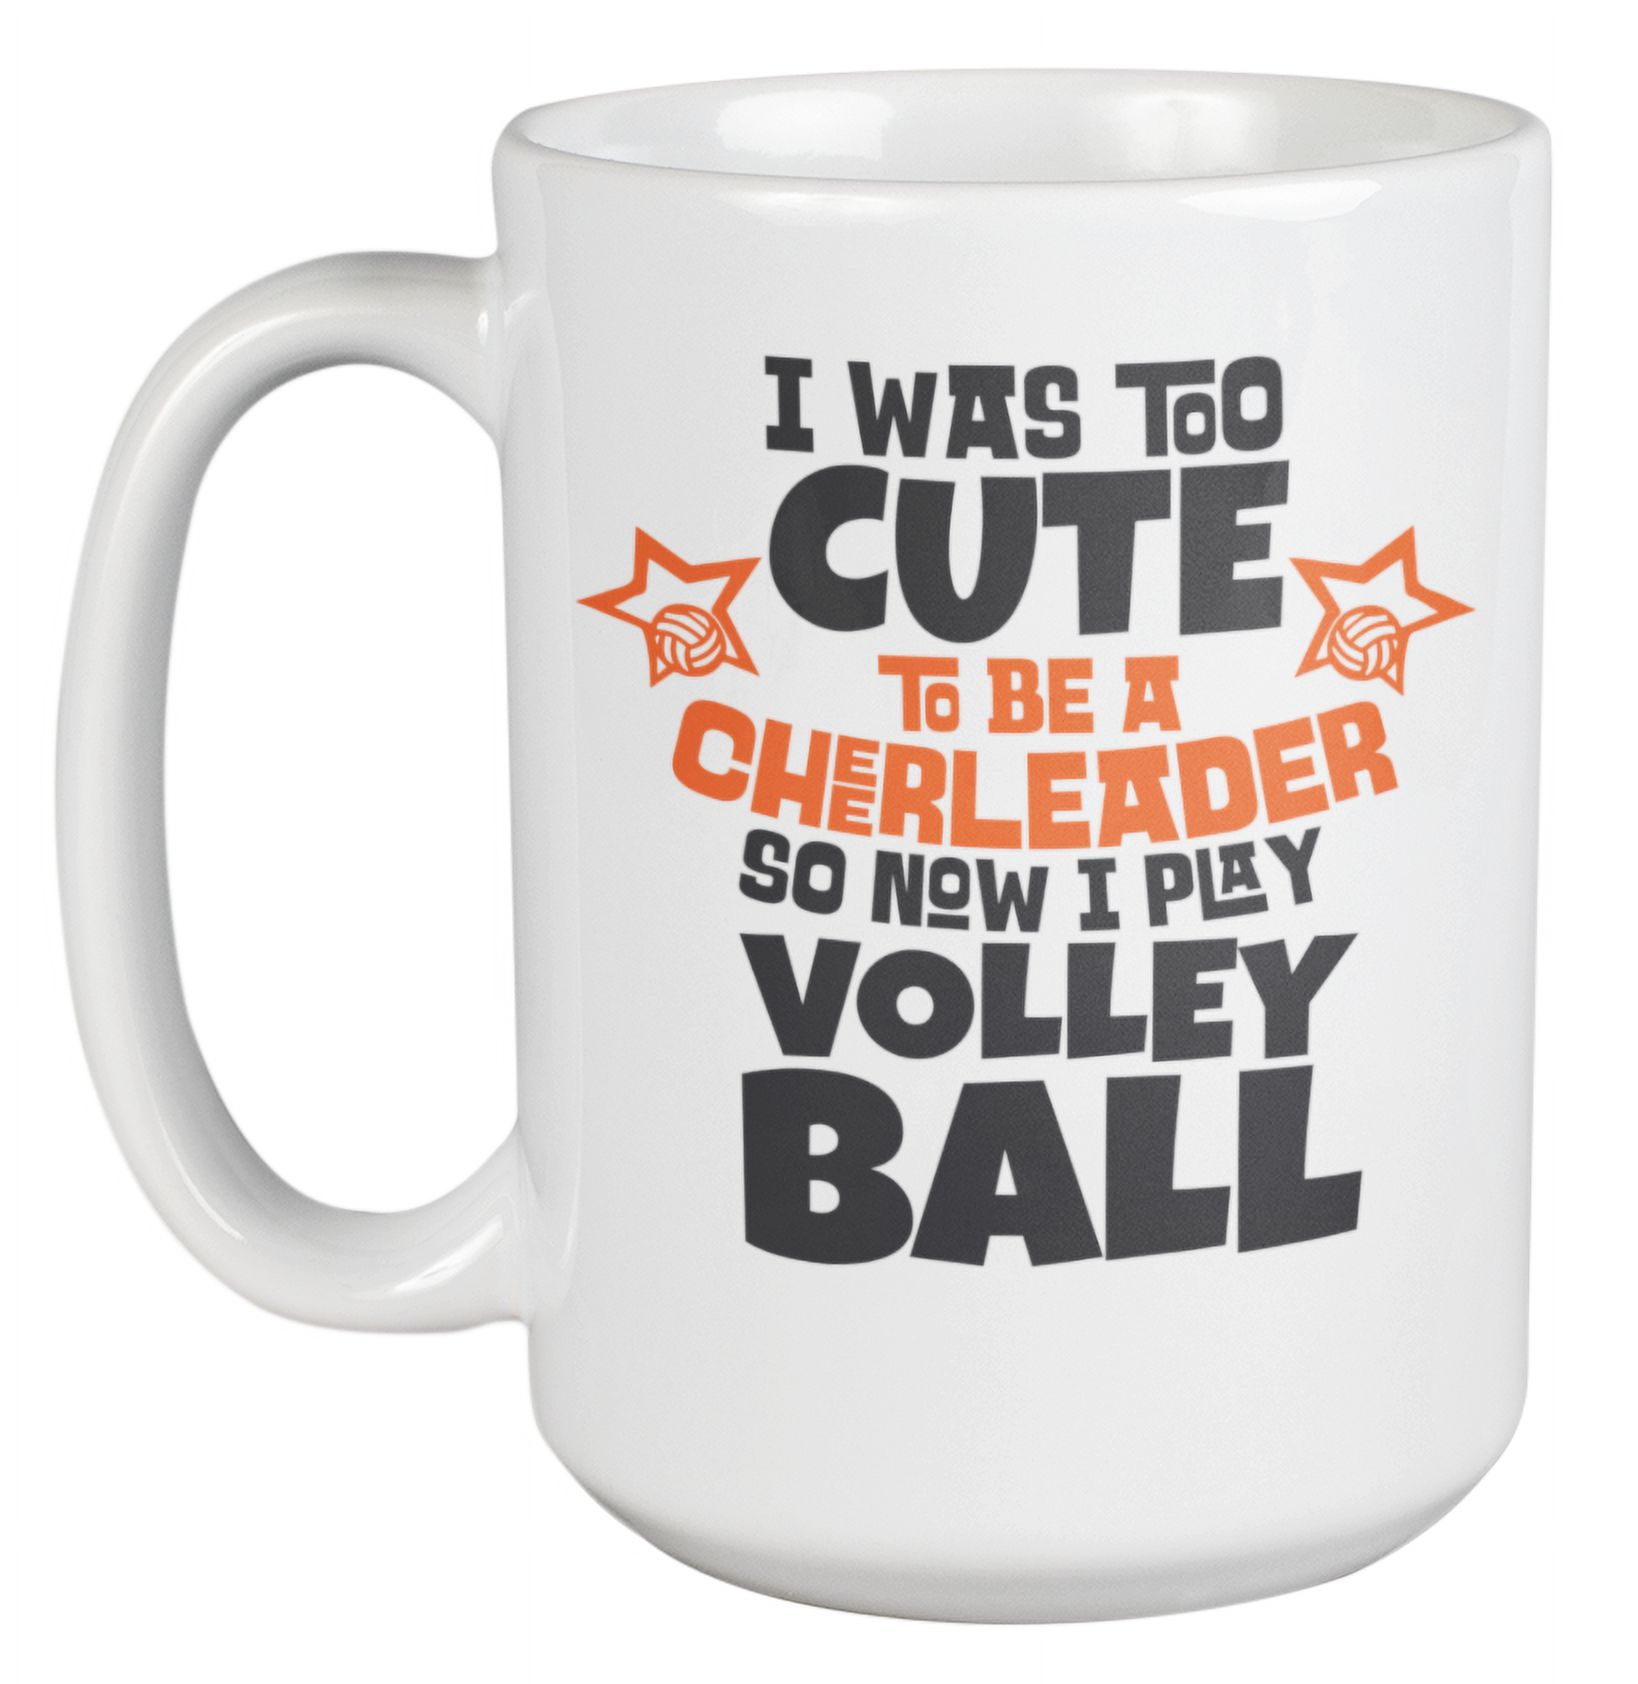 I Was Too Cute To Be A Cheerleader So Now I Play Volleyball. Funny Coffee & Tea Mug For Spiker, Player, Athlete, Coach, Captain Ball Friend, Bestfriend, Sport Lovers, Men And Women Players (15oz) - image 1 of 3